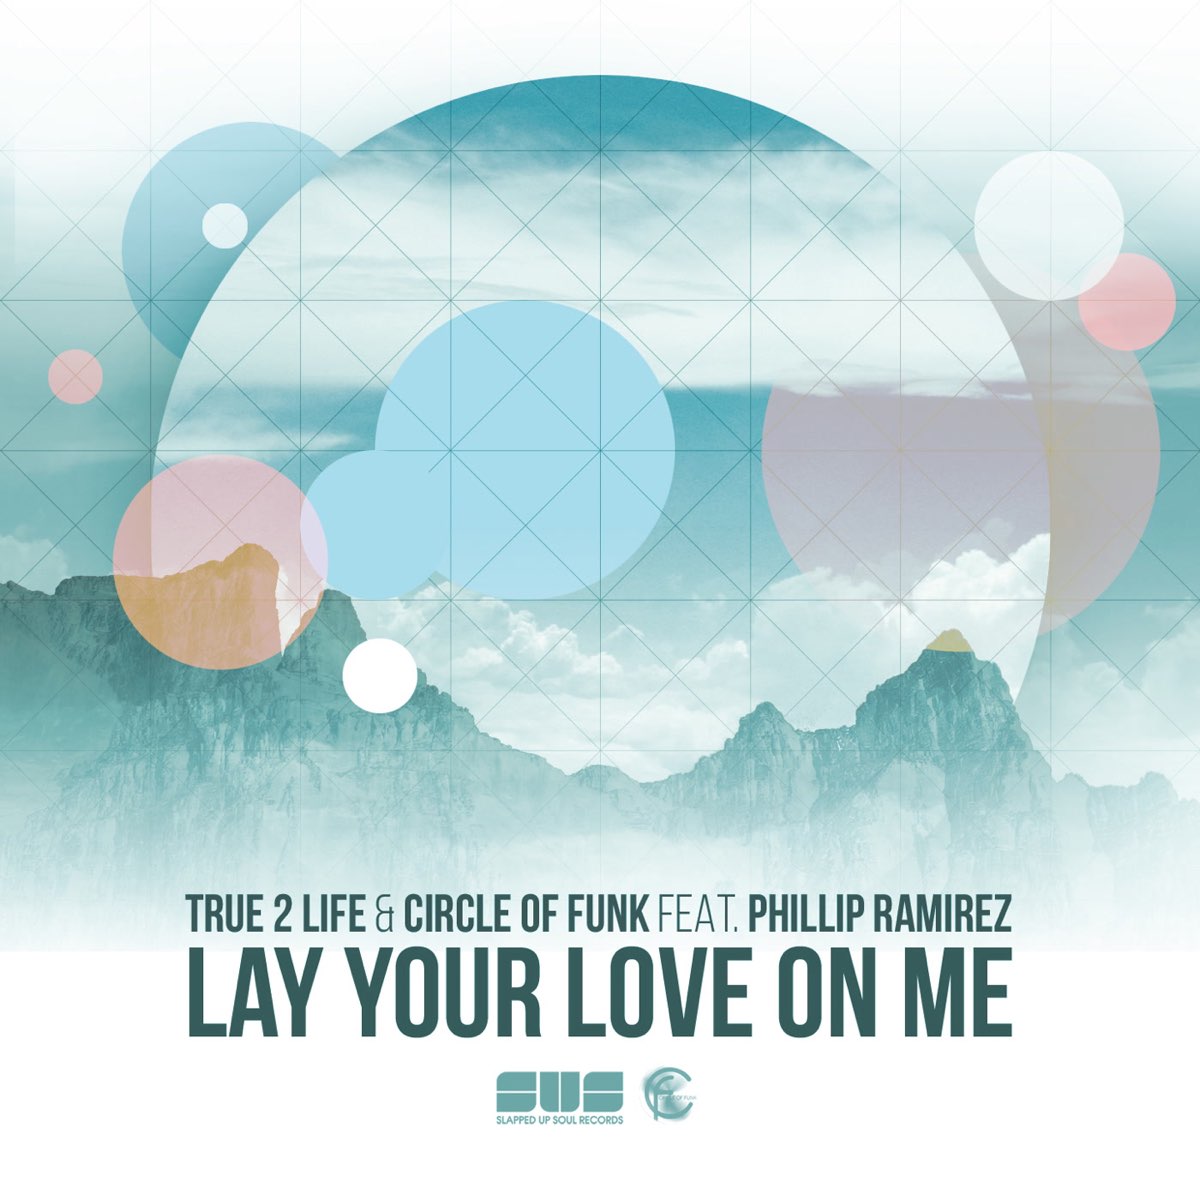 Lay on your love on me. Circle of Life. 7even Life in circles. Lay all your Love on me. Lay all your Love on download.